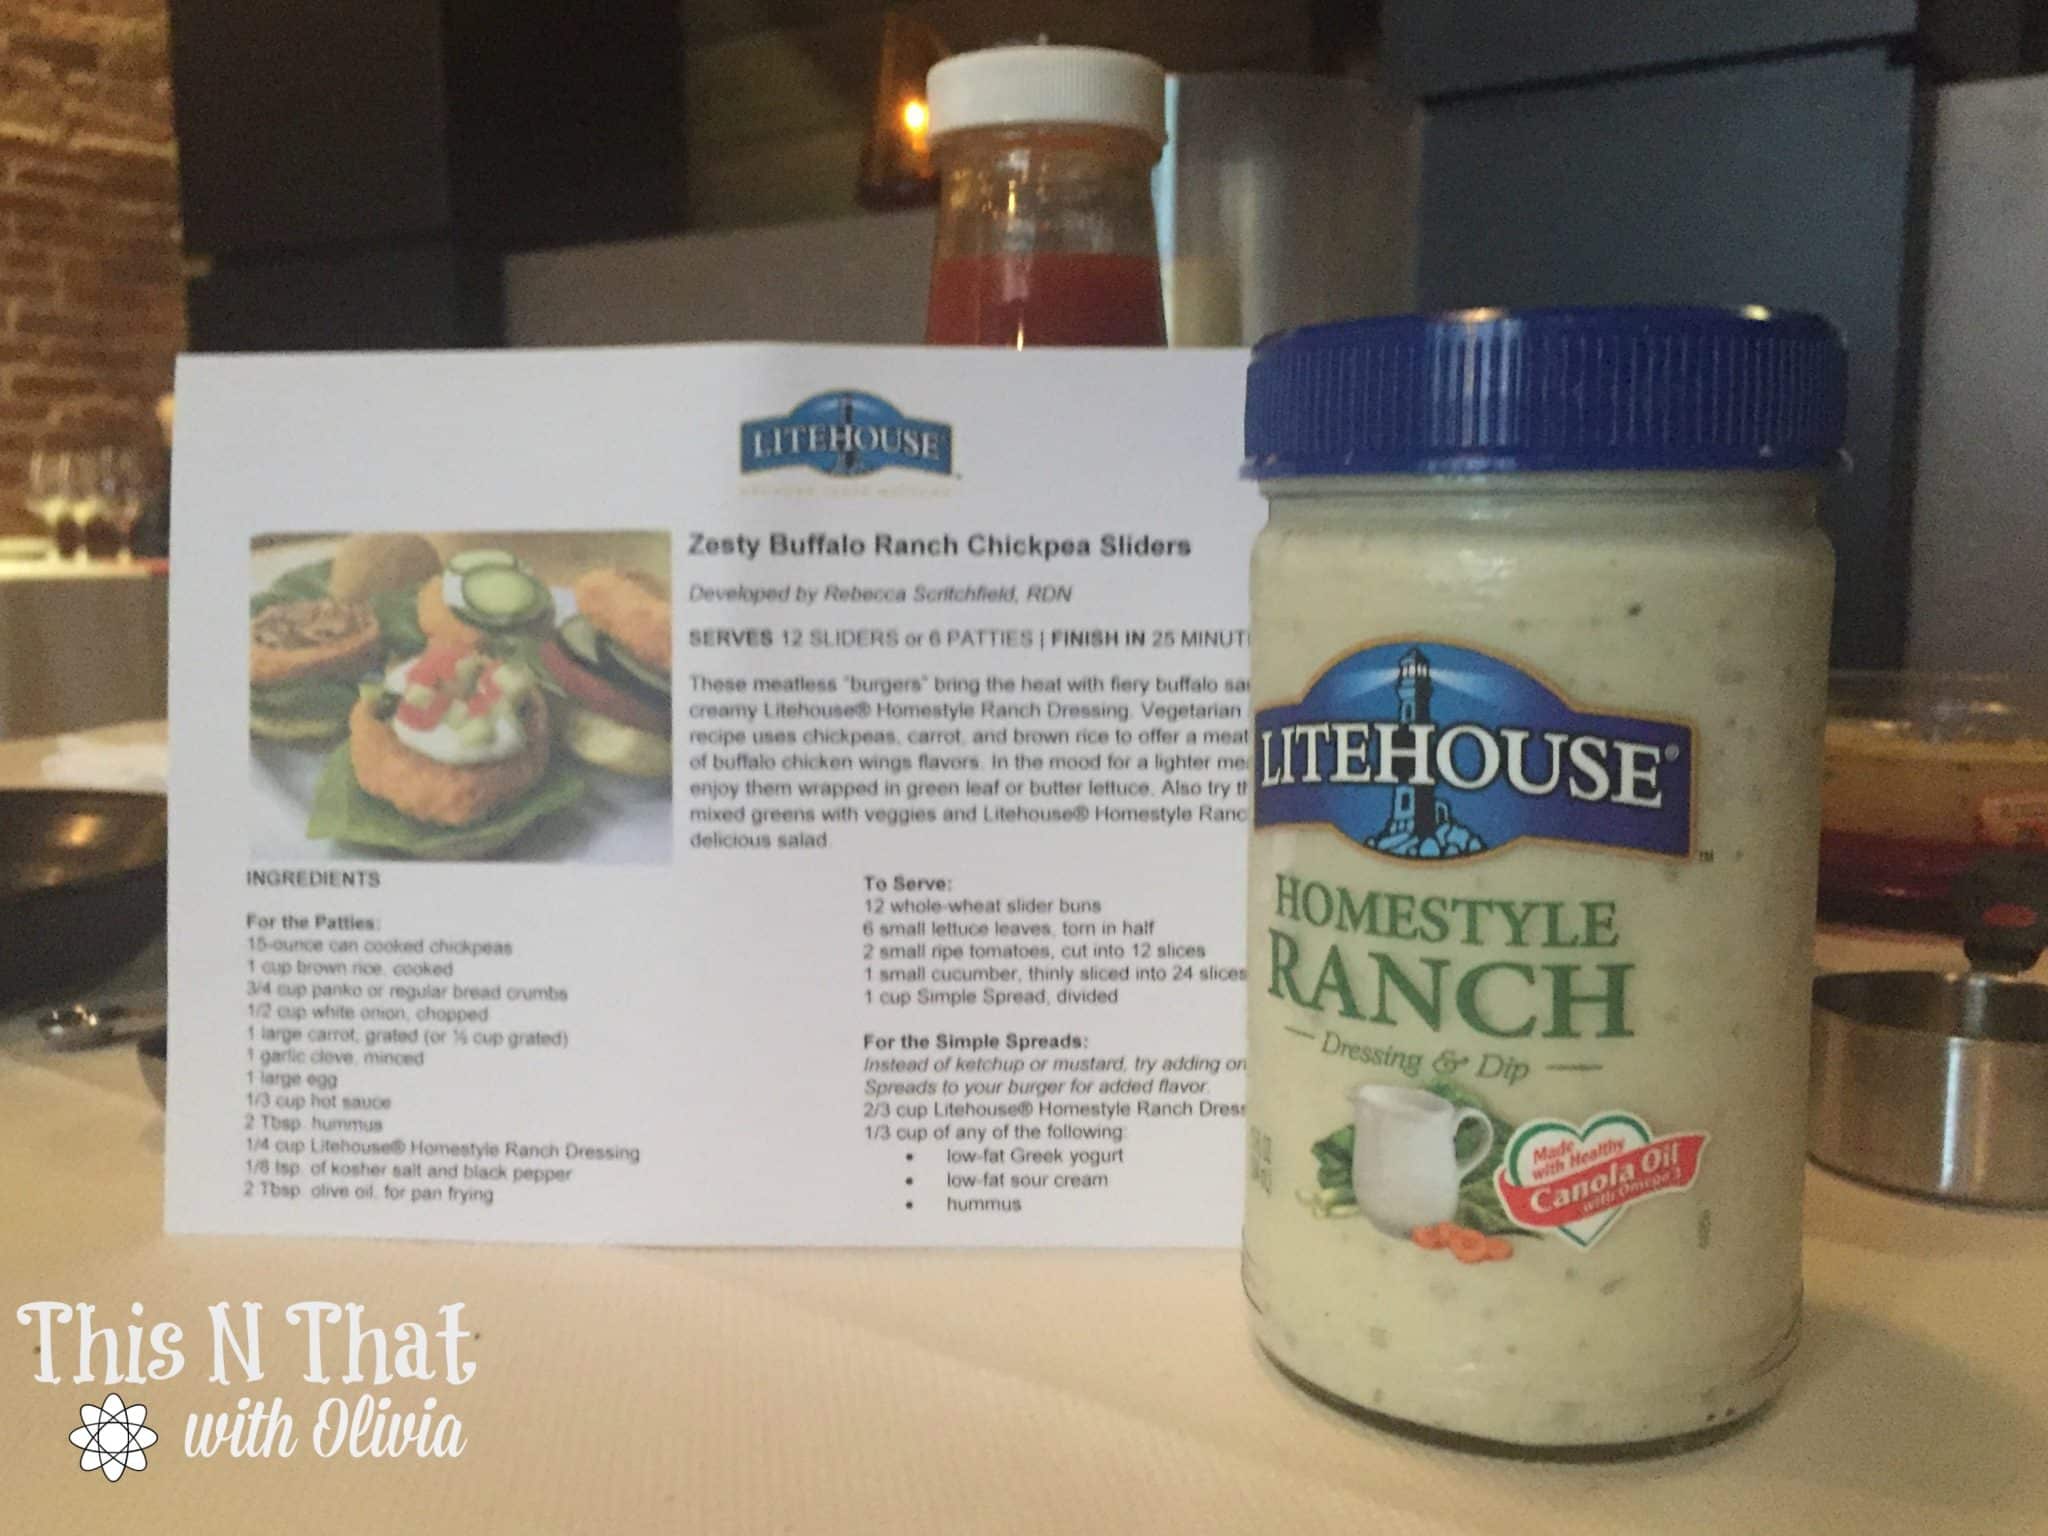 #SeetheLite Event with @LitehouseFoods | ThisNThatwithOlivia.com